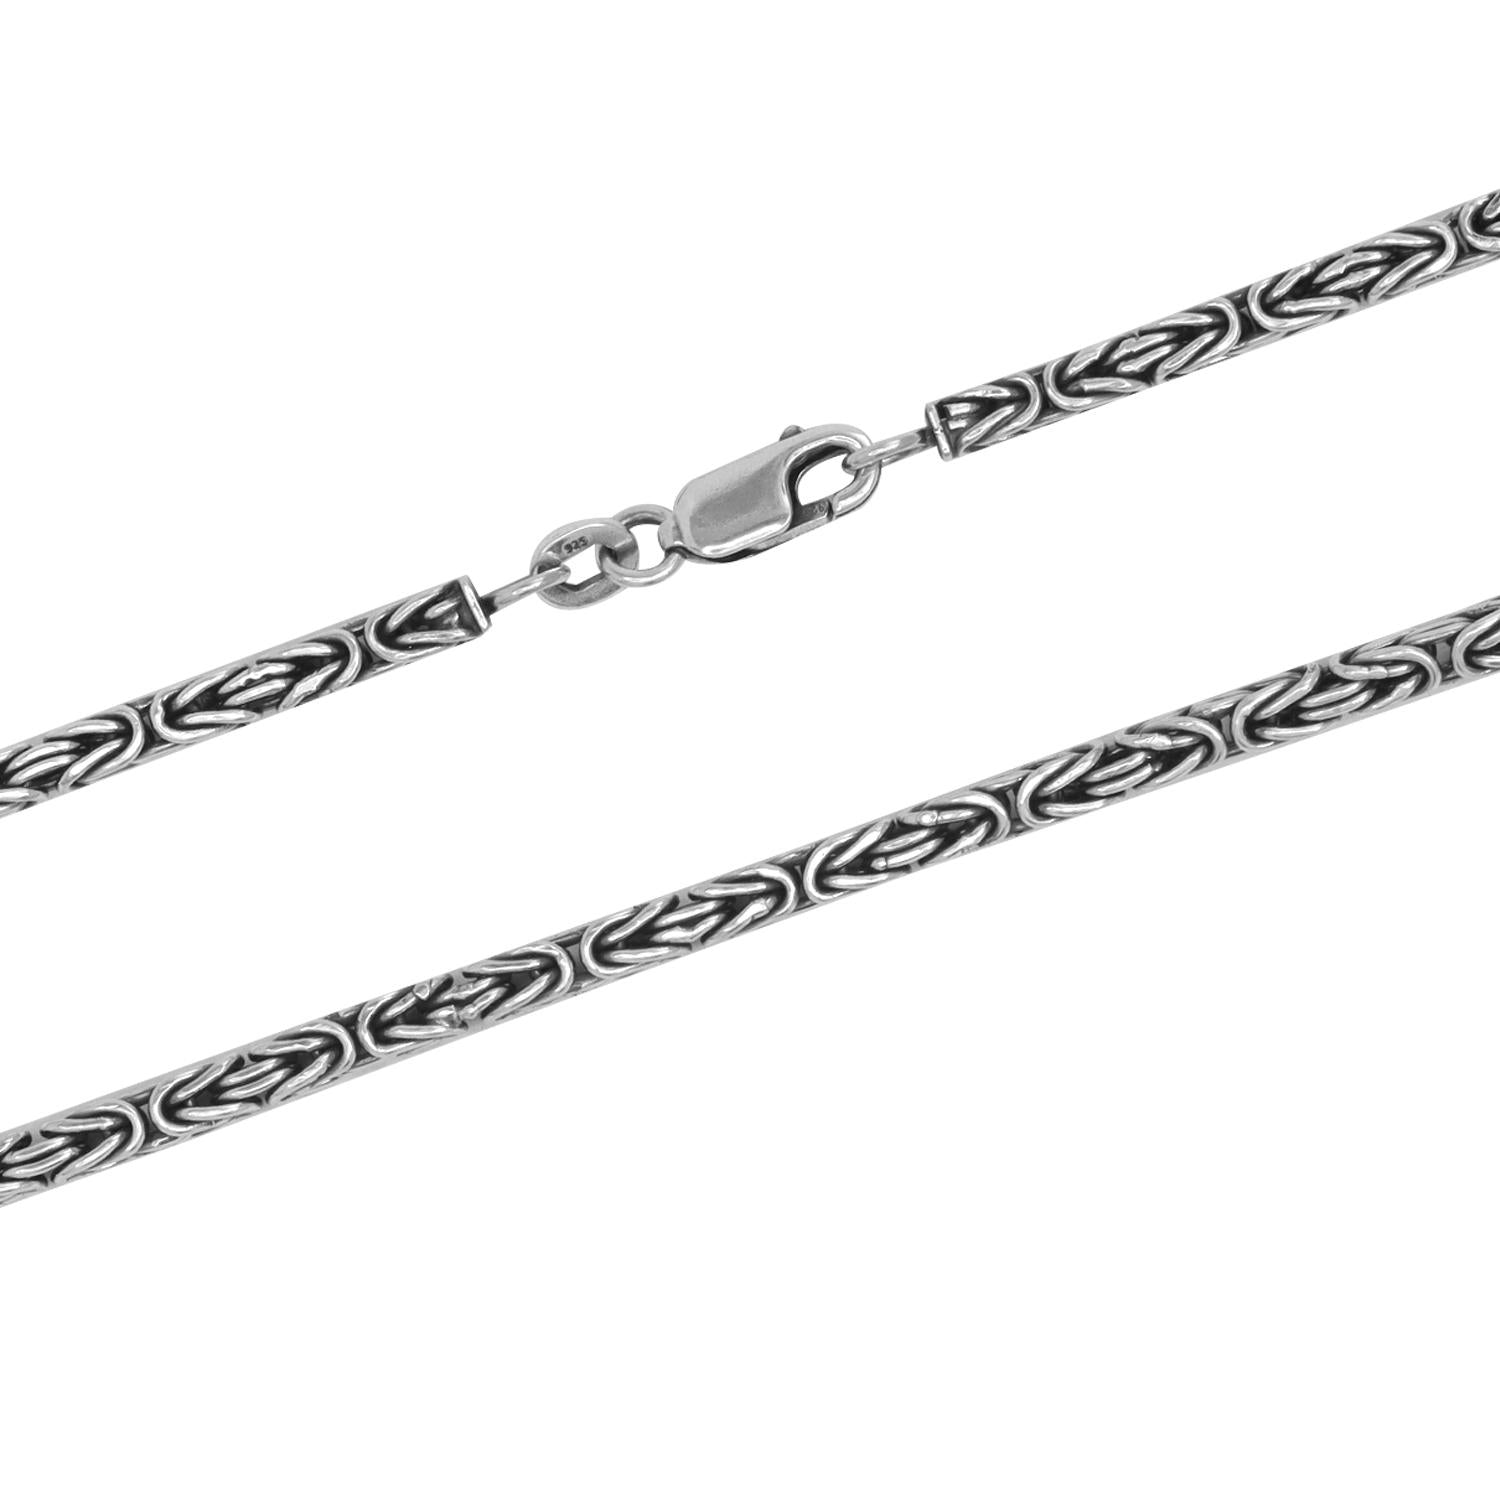 925 Sterling Silver Italian Square Handmade Classic Antique Byzantine Link Chain Necklace for Men and Women 2.5 MM